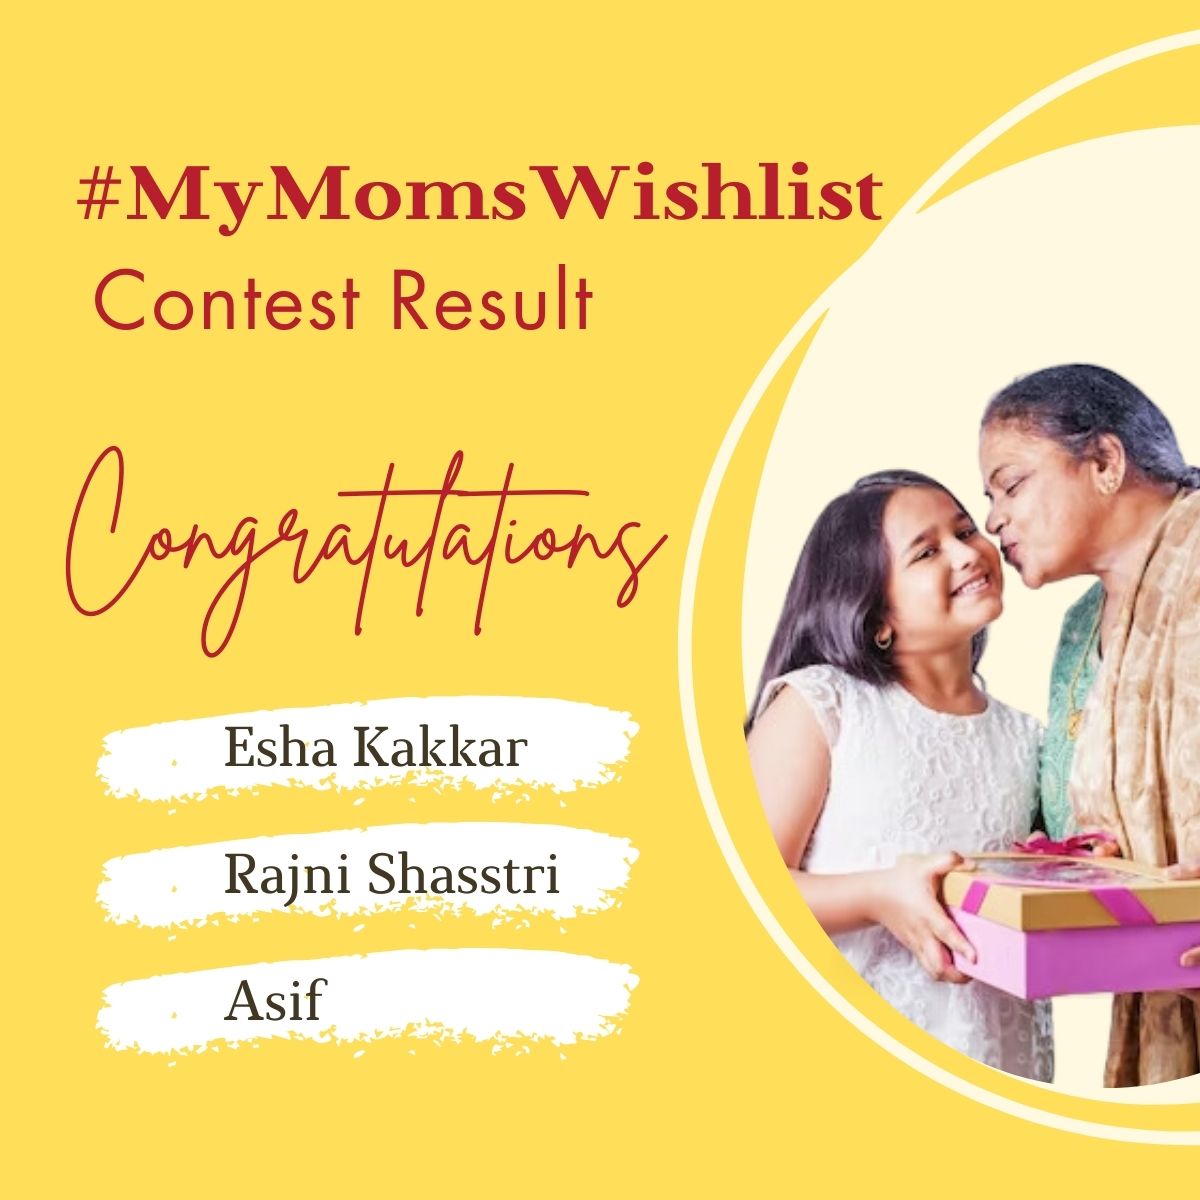 While there can only be a few winners, every entry warmed our hearts.💕

Congratulations to the winners of #MyMomsWishlist! Your heartfelt entries touched our hearts.

Winners, your gift cards are on the way! 💌
#WoohooContest #MothersDay #ContestResult #Winners #MyMomsWishlist #